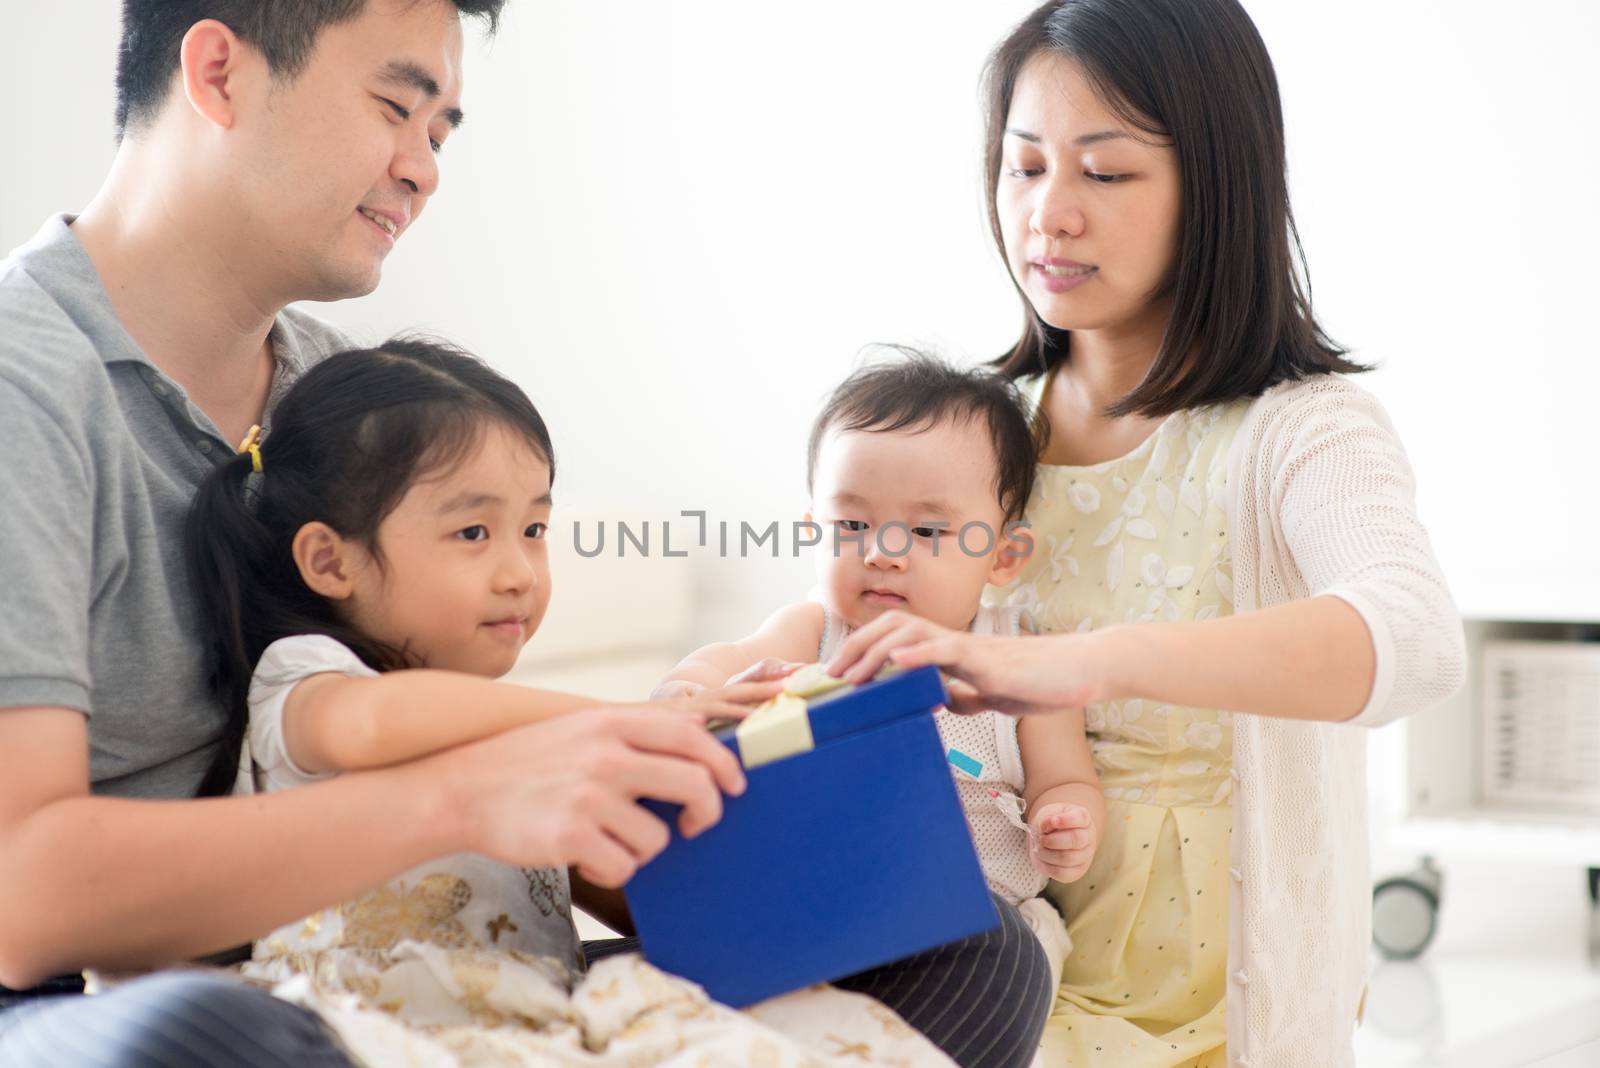 Parents and children open gift box together. Asian family spending quality time at home, natural living lifestyle indoors.